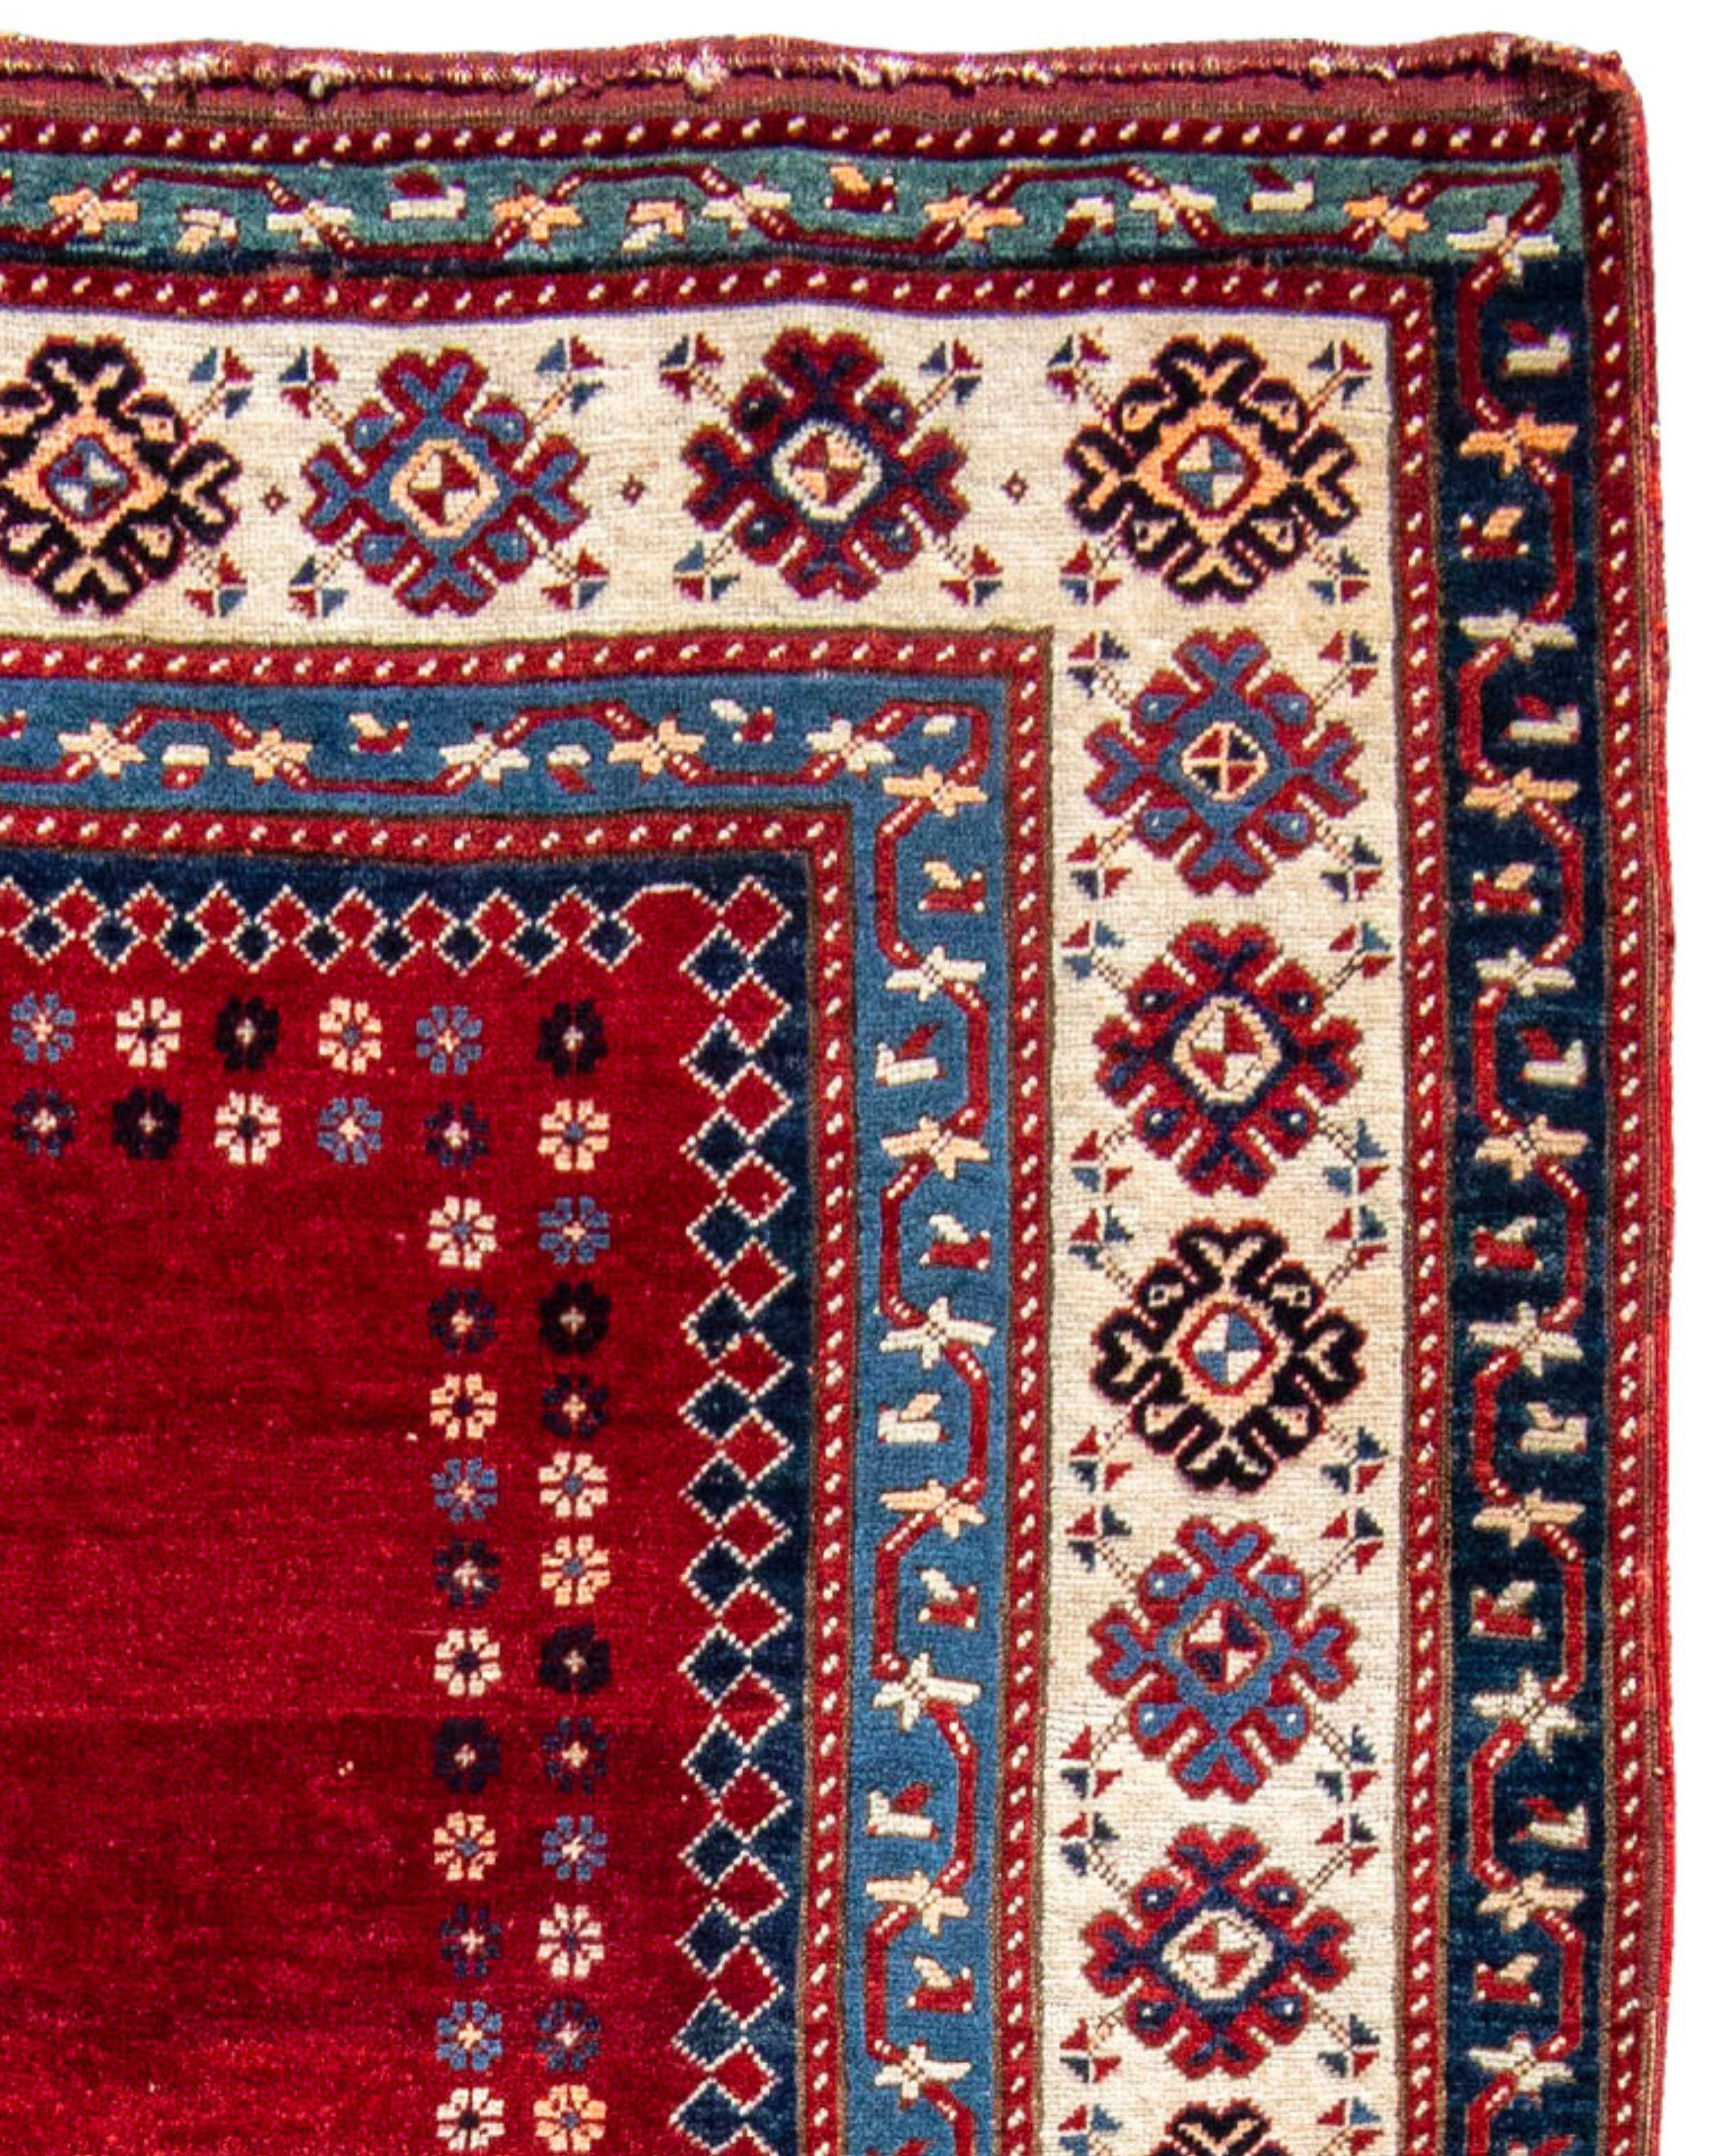 Antique Kazak Rug, Late 19th Century

With an empty red field with multi-colored snowflake-like motif floating on the edges, framed by the blue/green reciprocal designed border, this rug catches the eye, more so than if more design was immediately